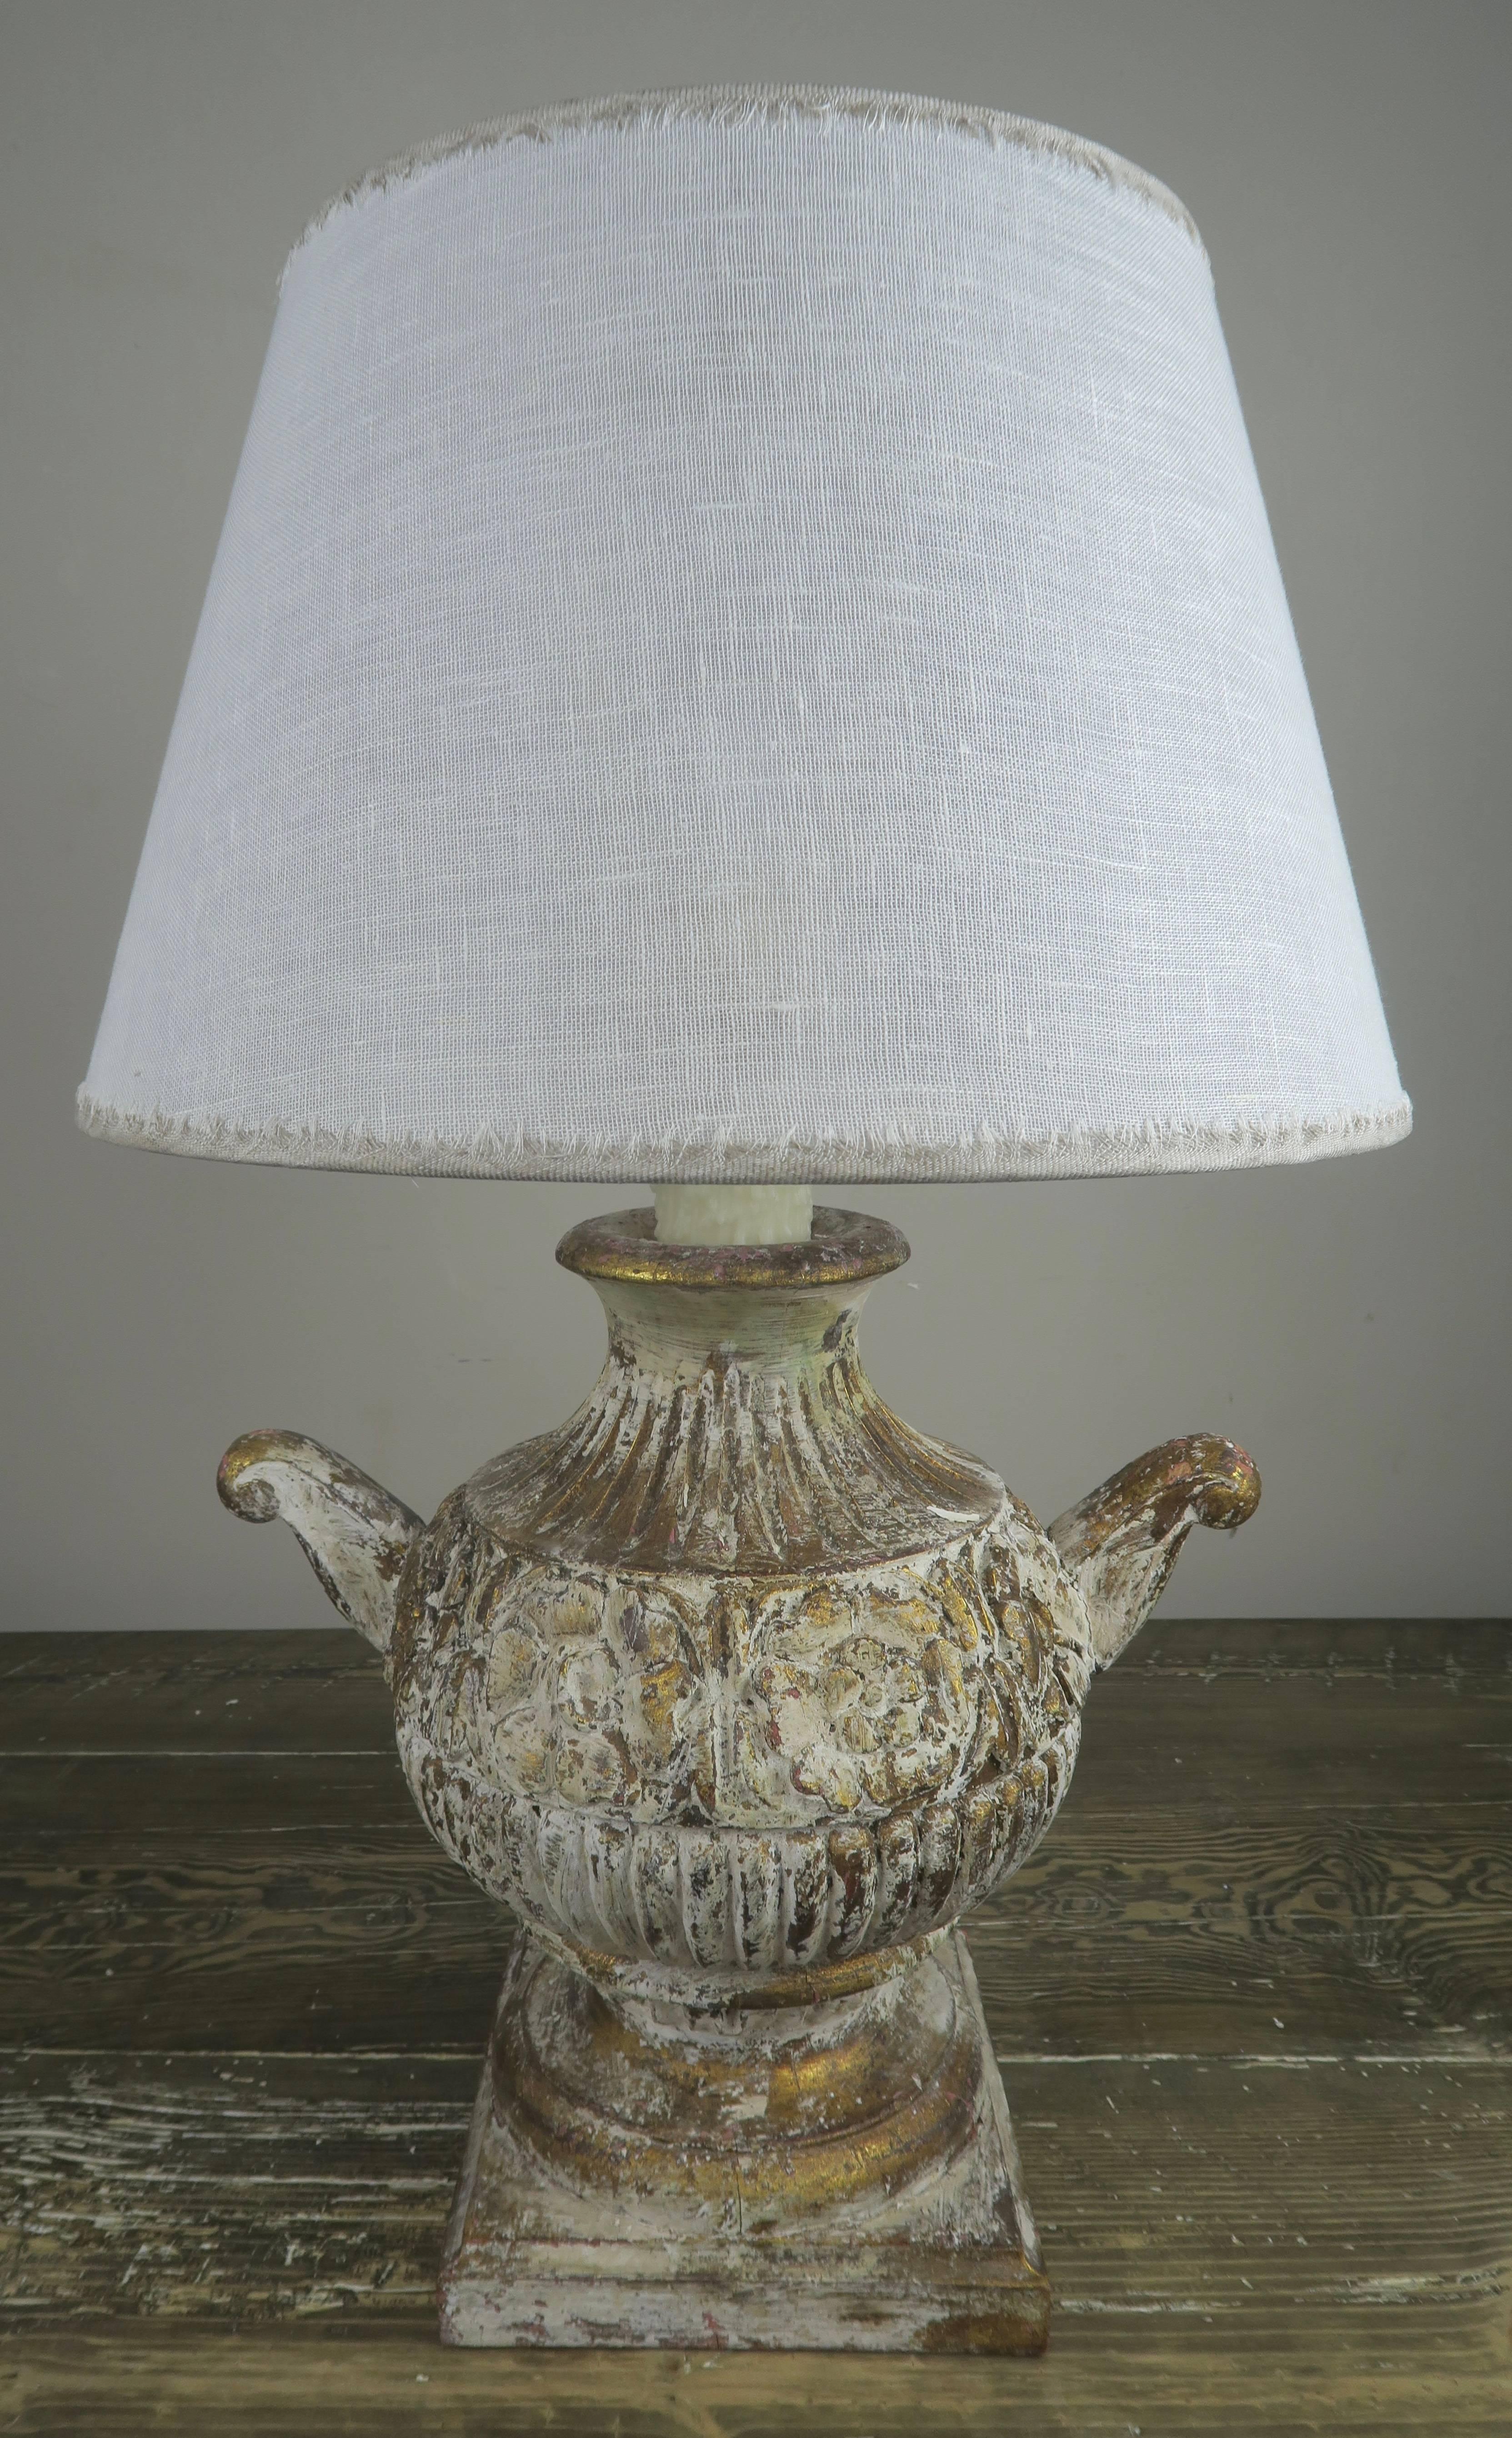 Pair of carved Italian antique white with gold painted urn lamps with custom linen shades.
Linen shade size: 12